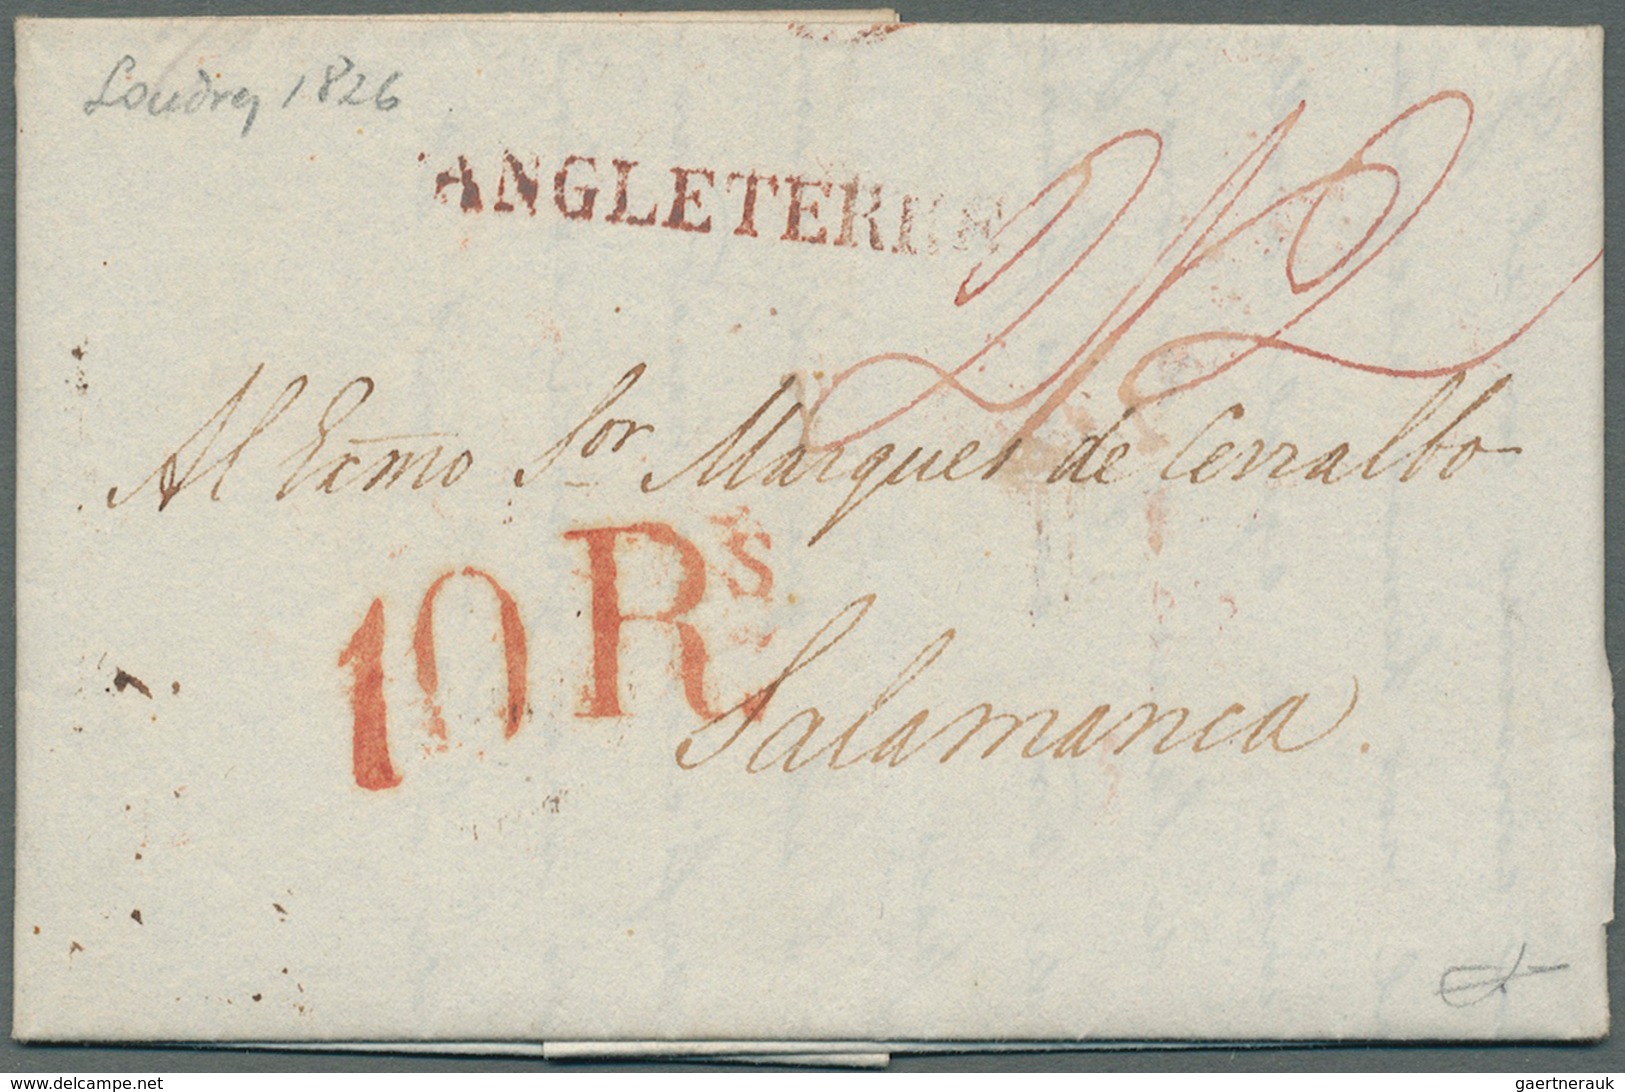 26639 Großbritannien - Vorphilatelie: 1791/1850 ca., 360 early covers with a great variety of cancellation